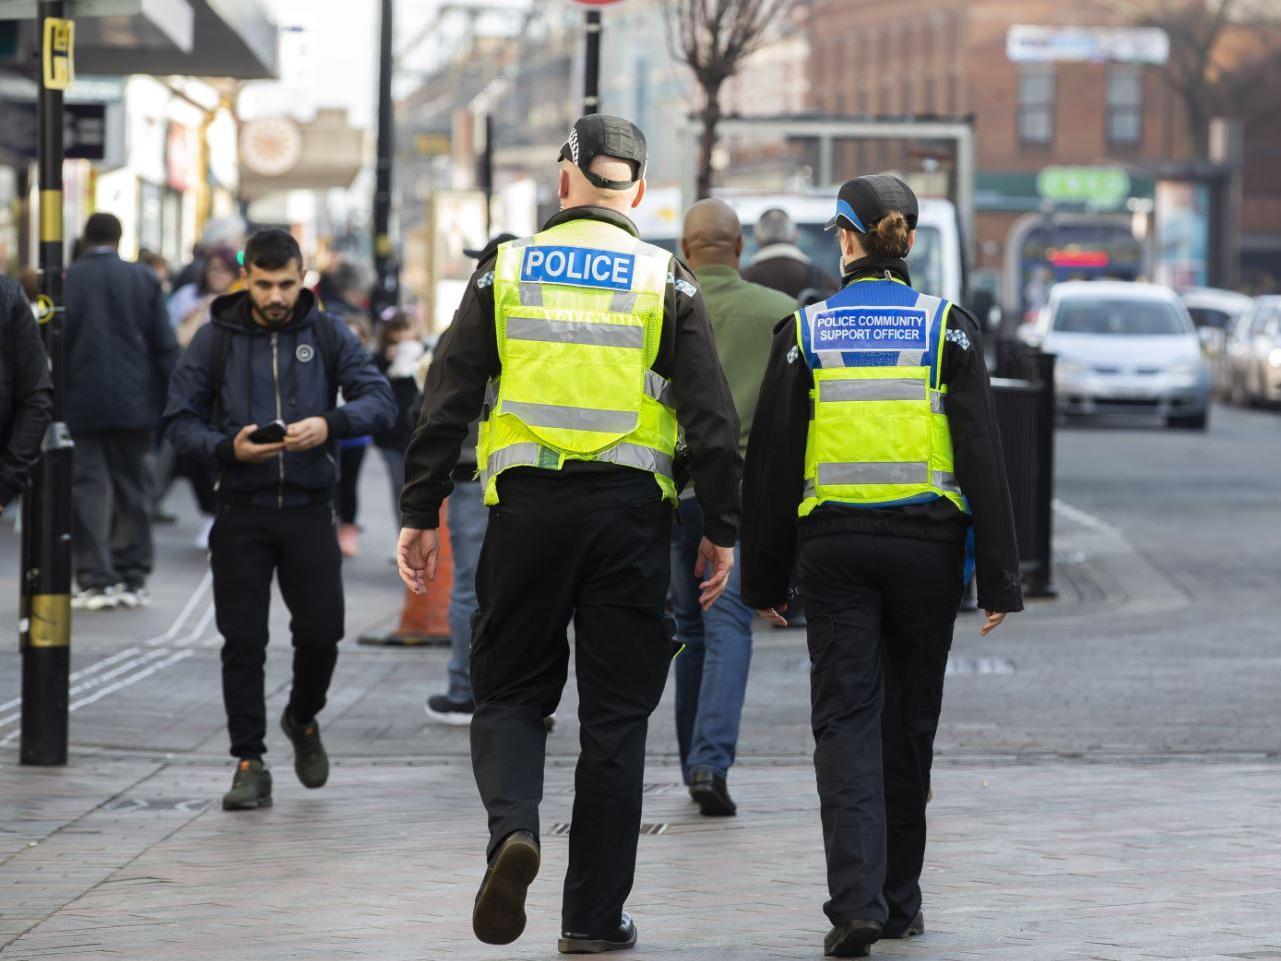 There were three reports of anti-social behaviour crimes on or near Vernon Street in October 2019